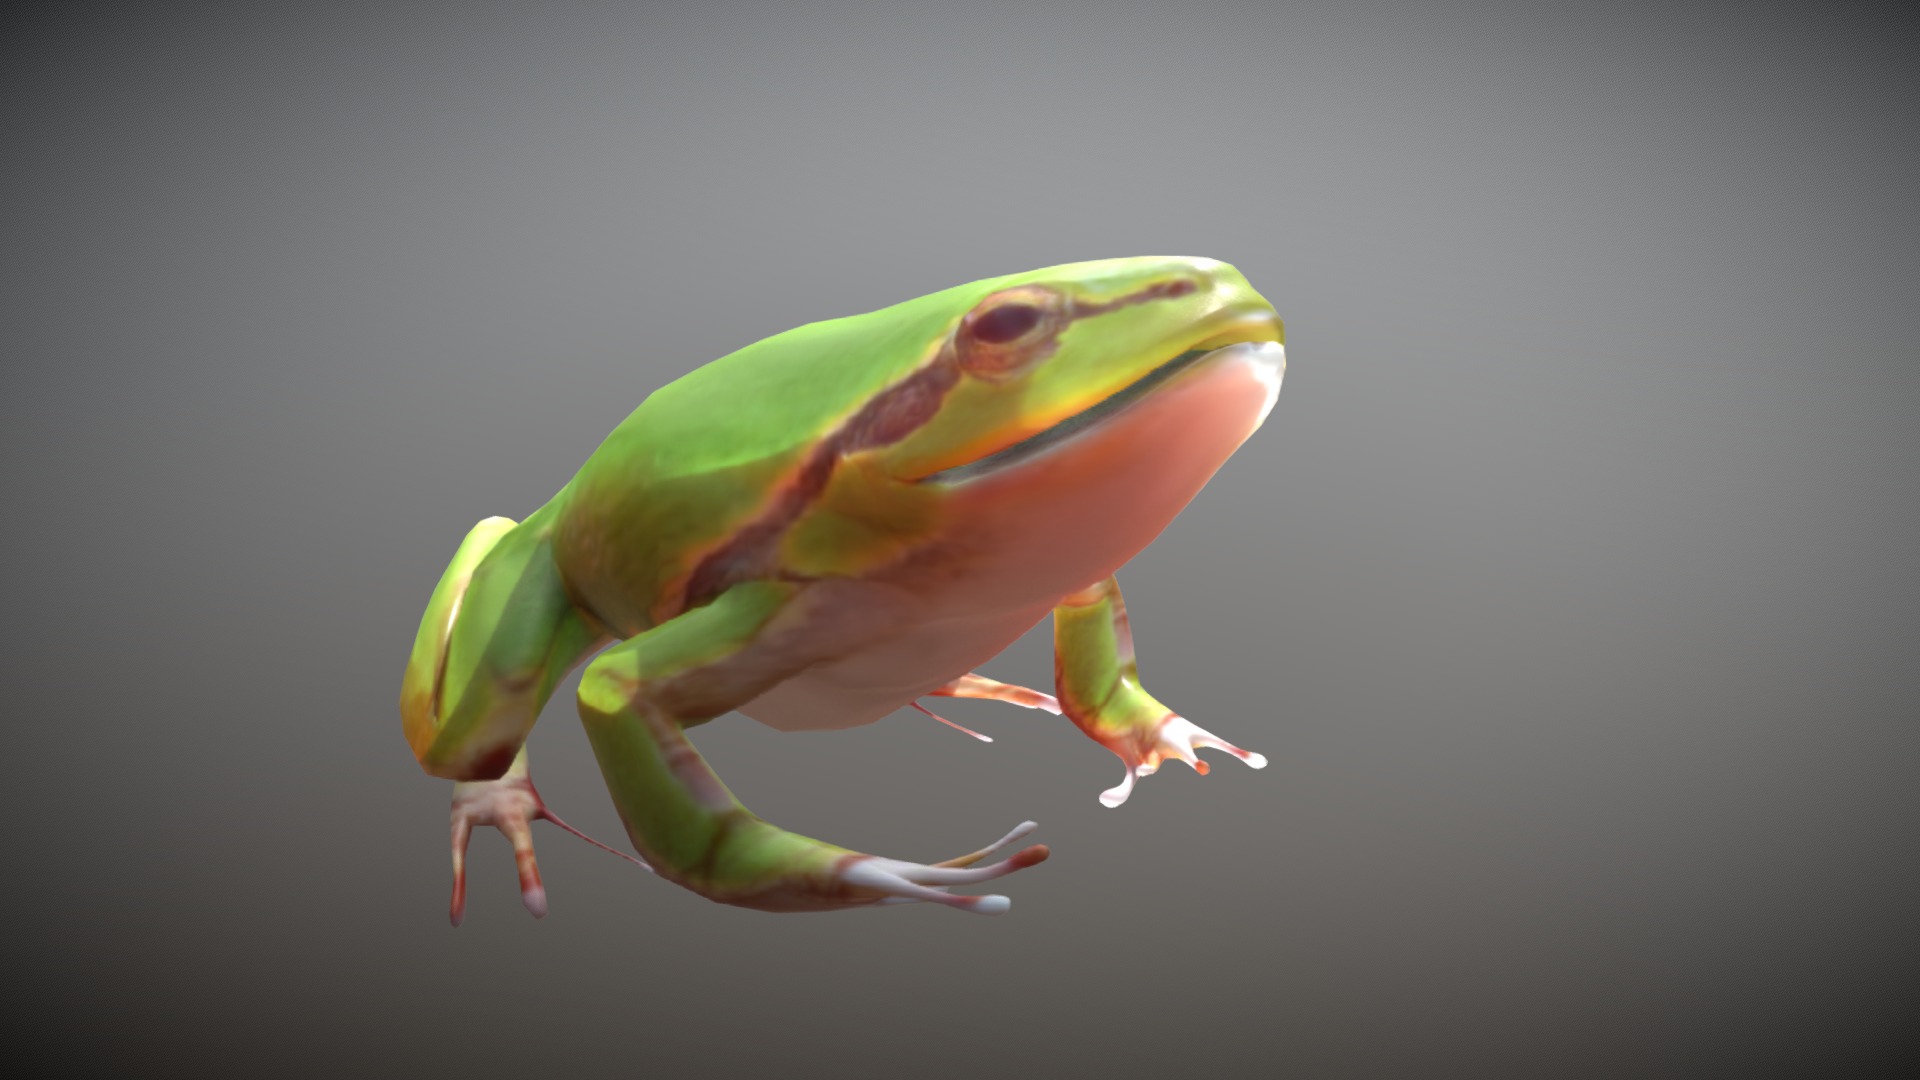 3D model Frog - This is a 3D model of the Frog. The 3D model is about a colorful frog on a branch.